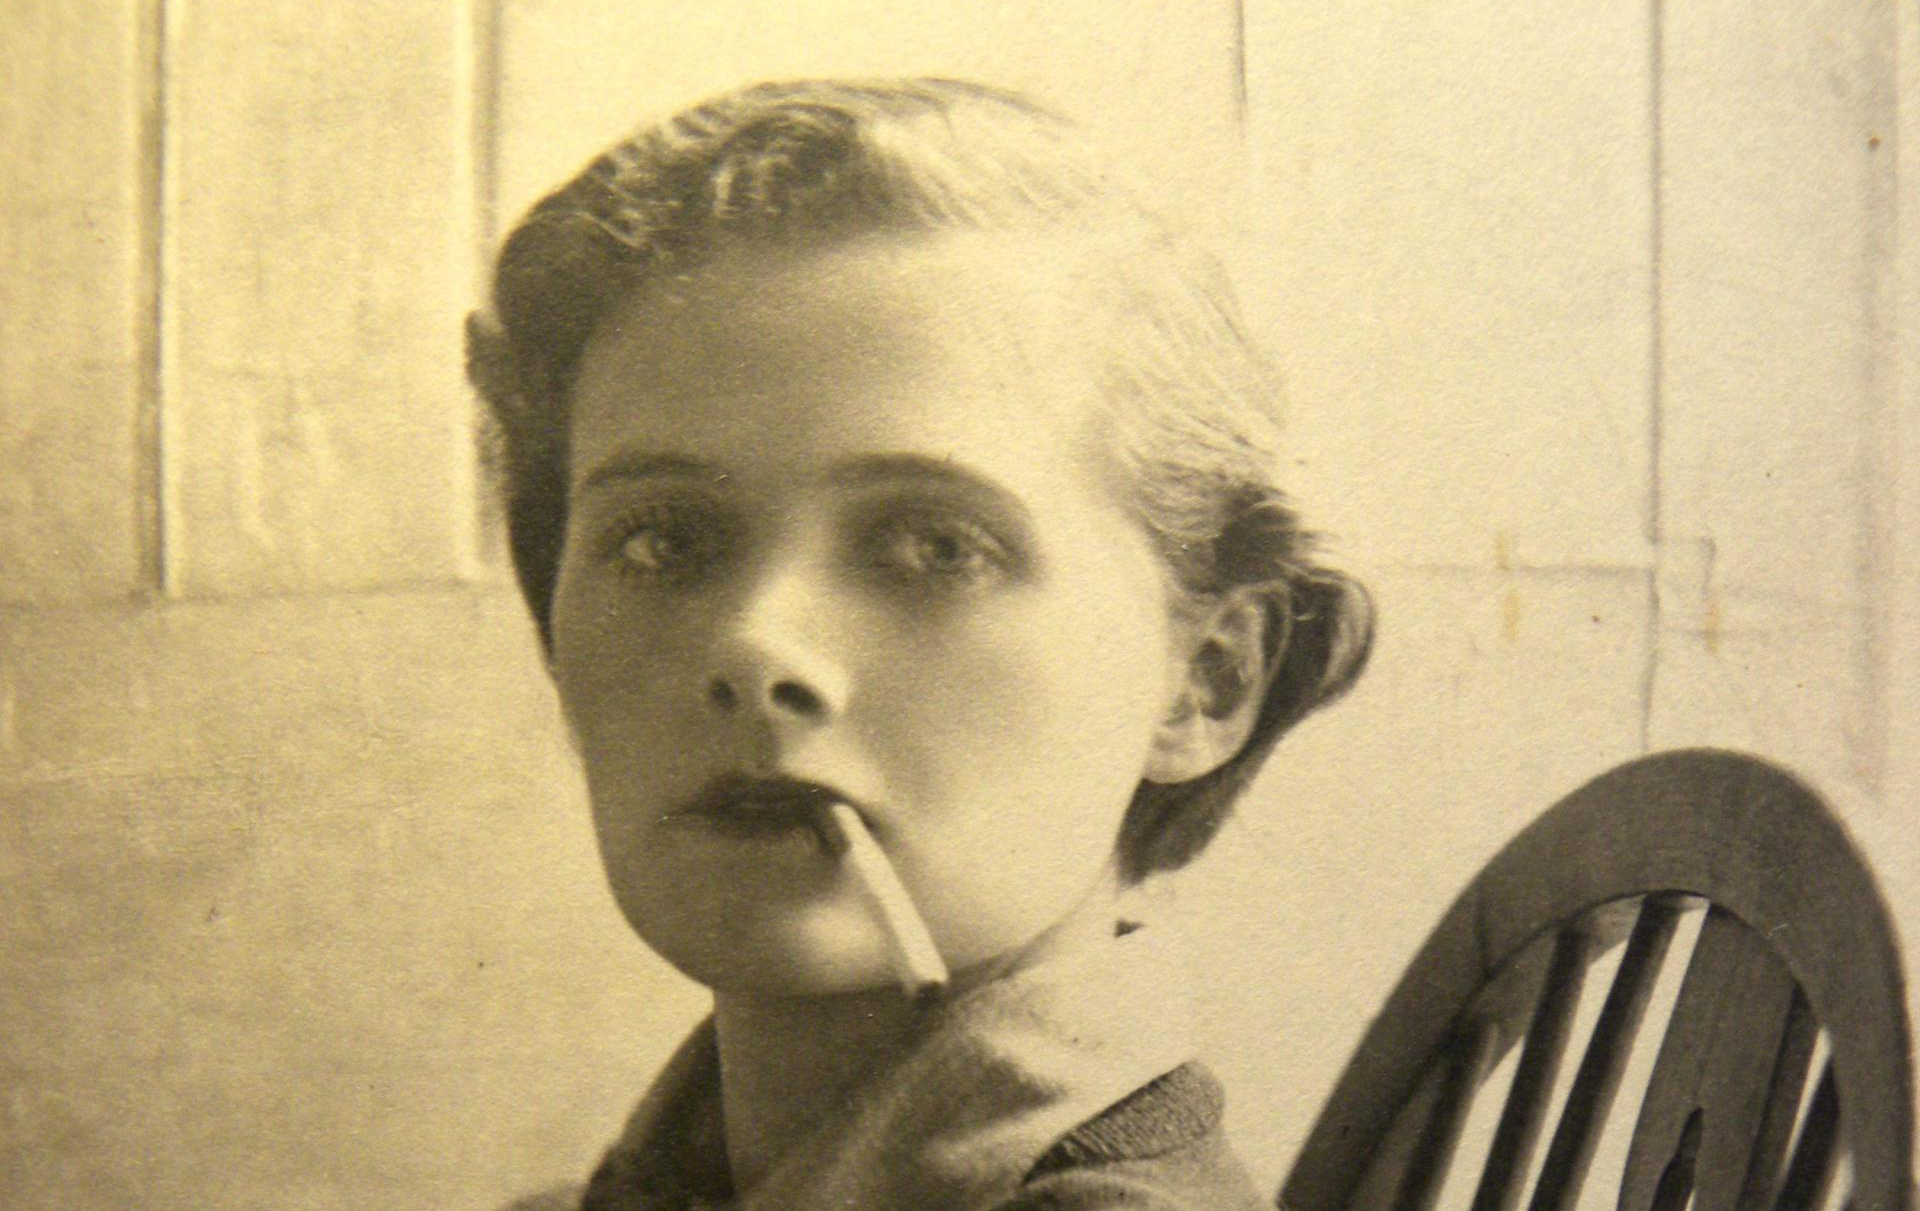 the book rebecca by daphne du maurier